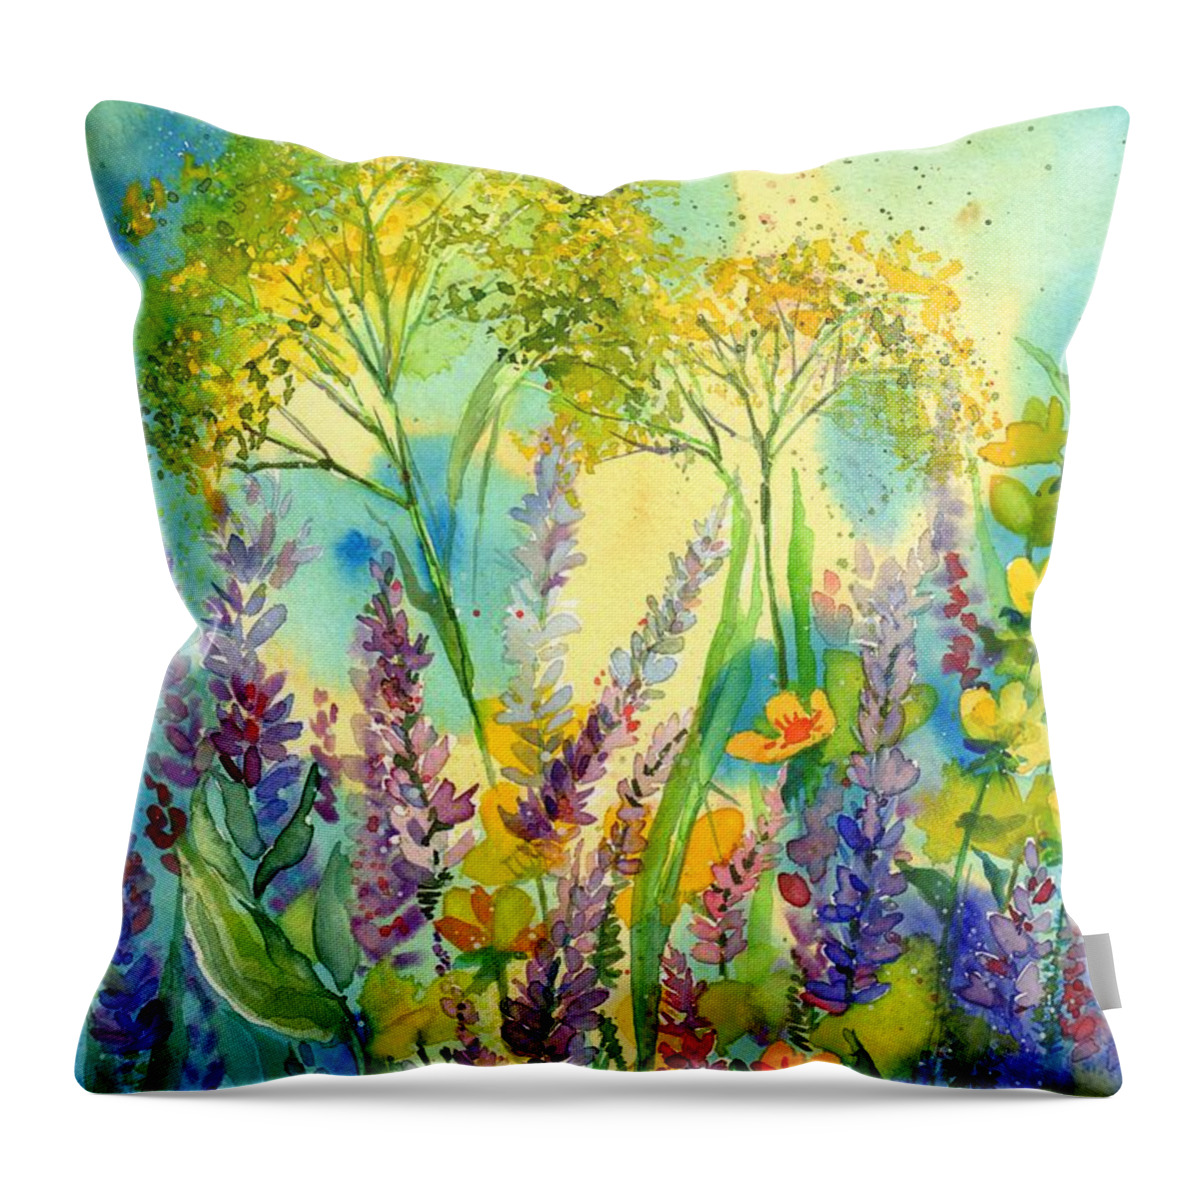 Spring Field Throw Pillow featuring the painting Spring Field by Suzann Sines